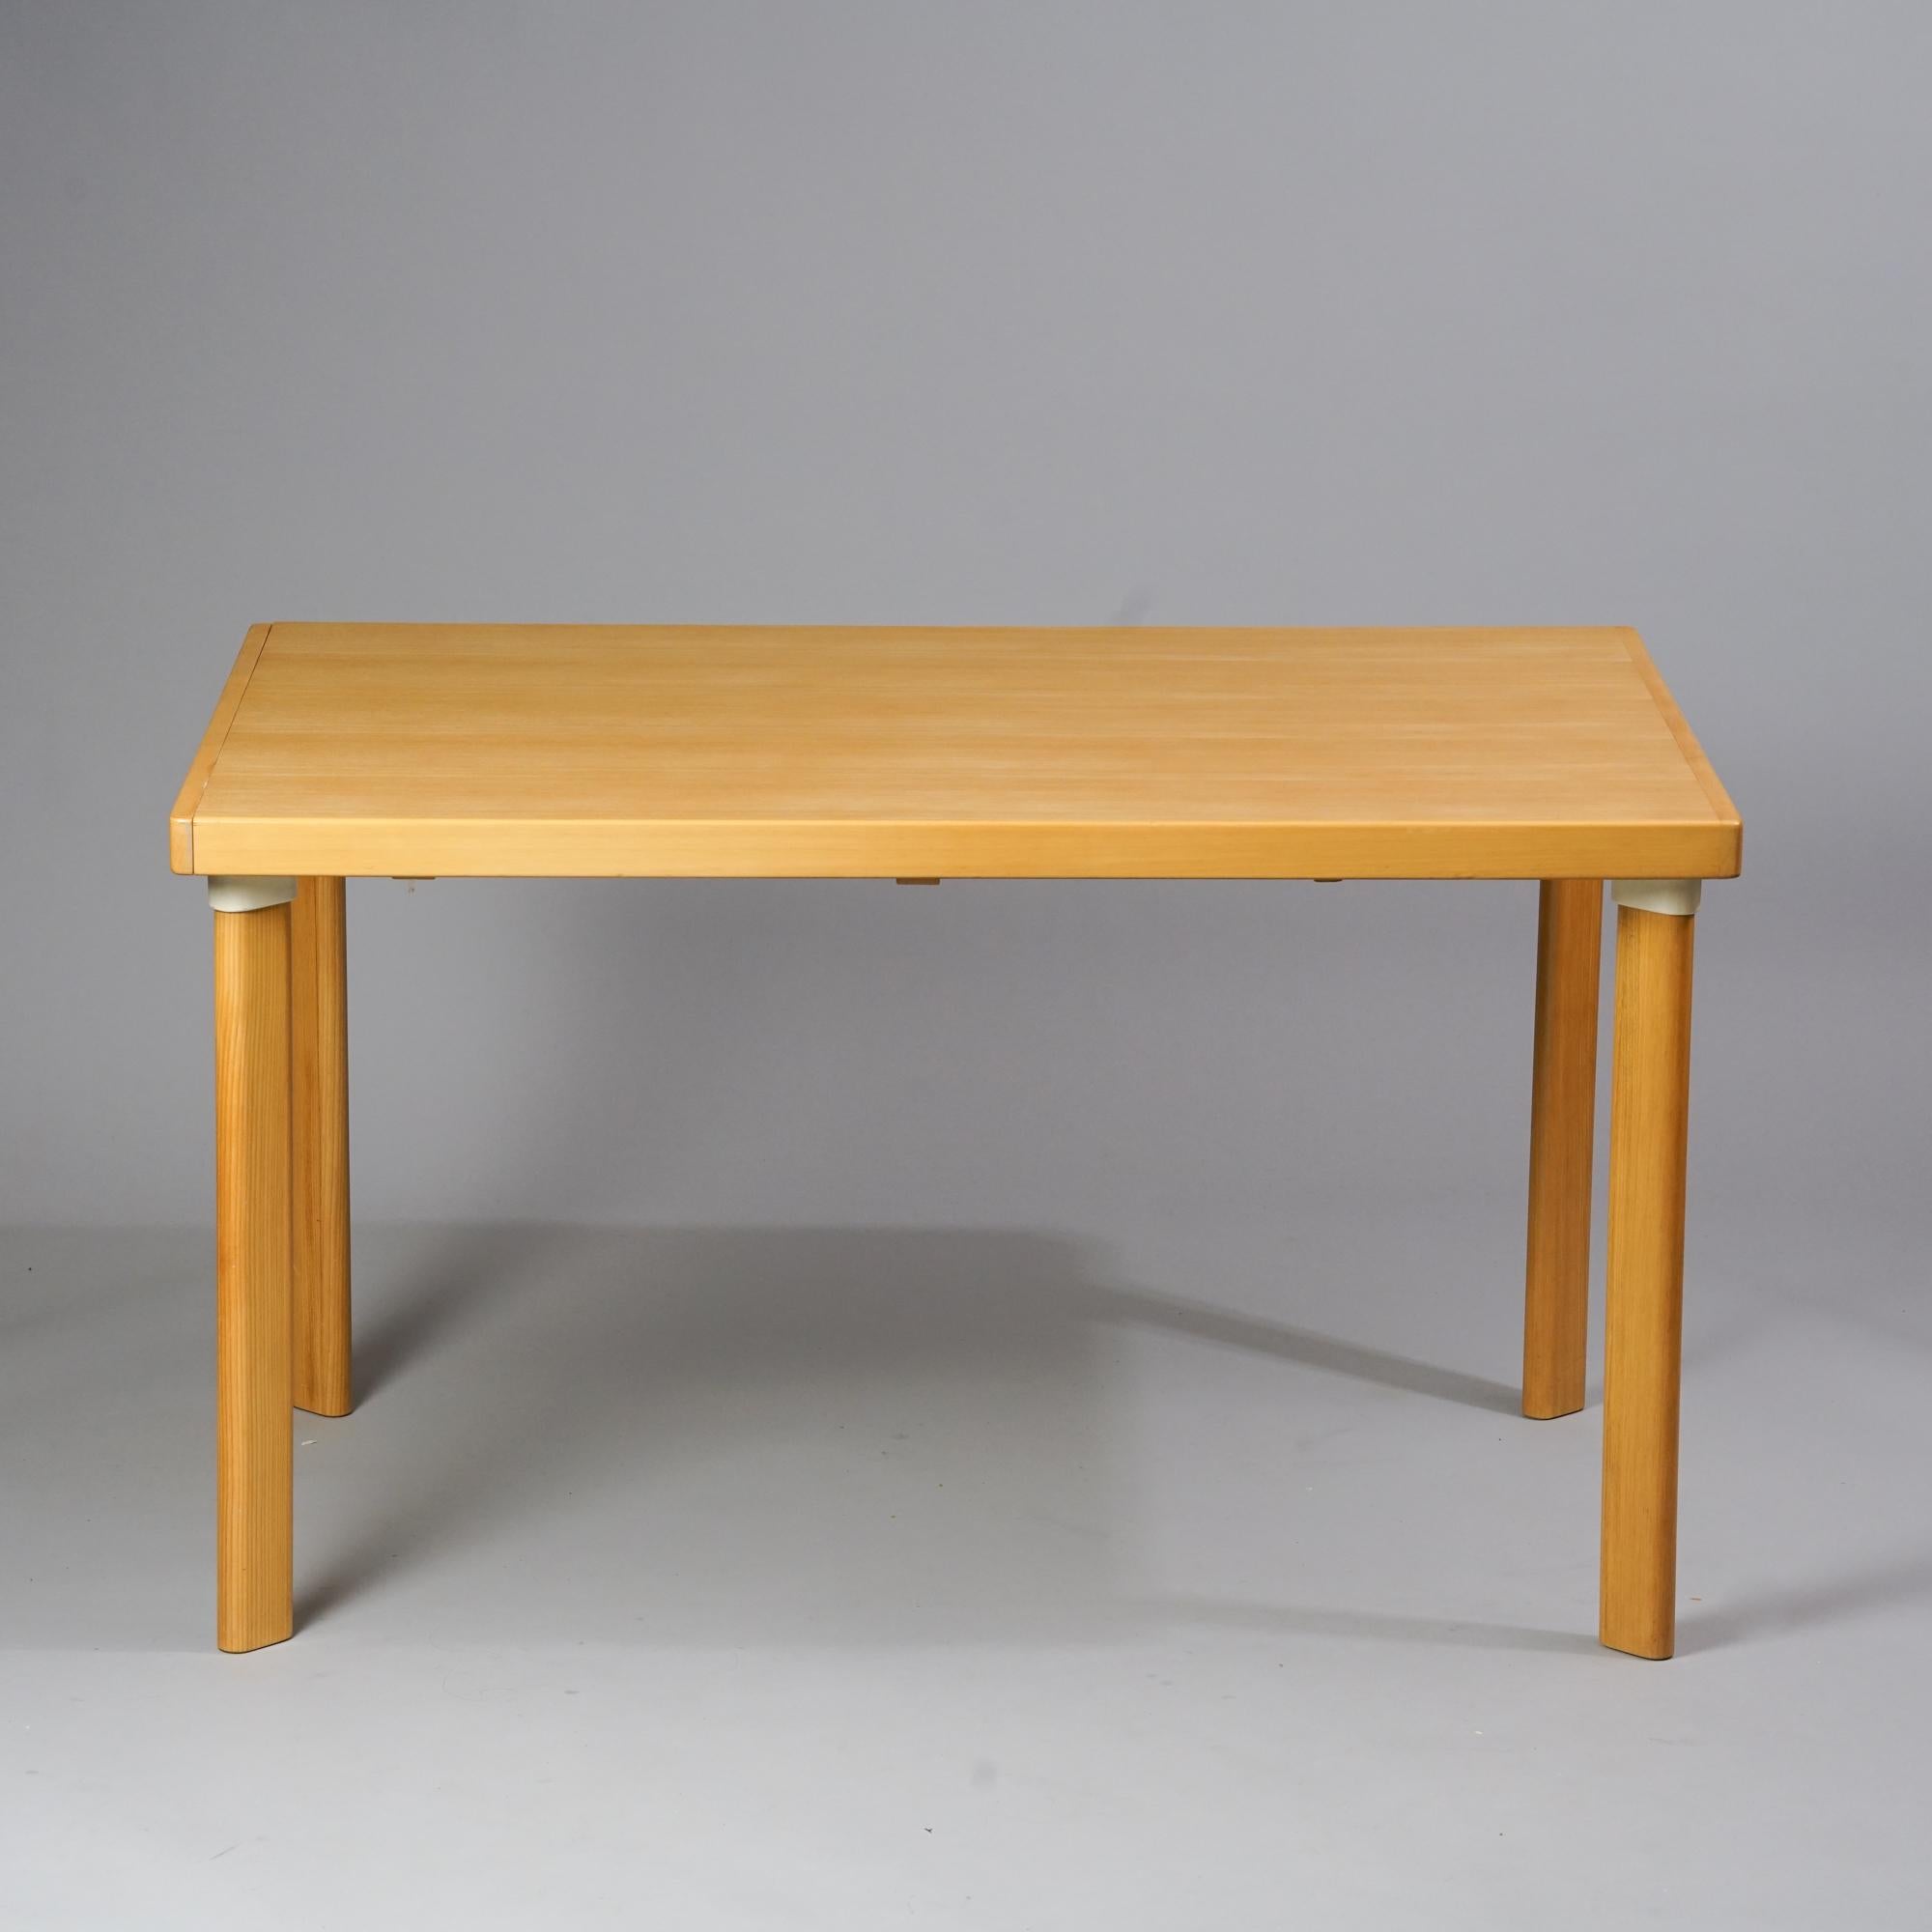 Rare Alvar Aalto Scandinavian modern dining room table for Artek in the mid 1900s. Ash tree, LH1 -legs, extendable, the extendable part can be stored under the table top. Good vintage condition, restored by a craftman who is specialised in vintage